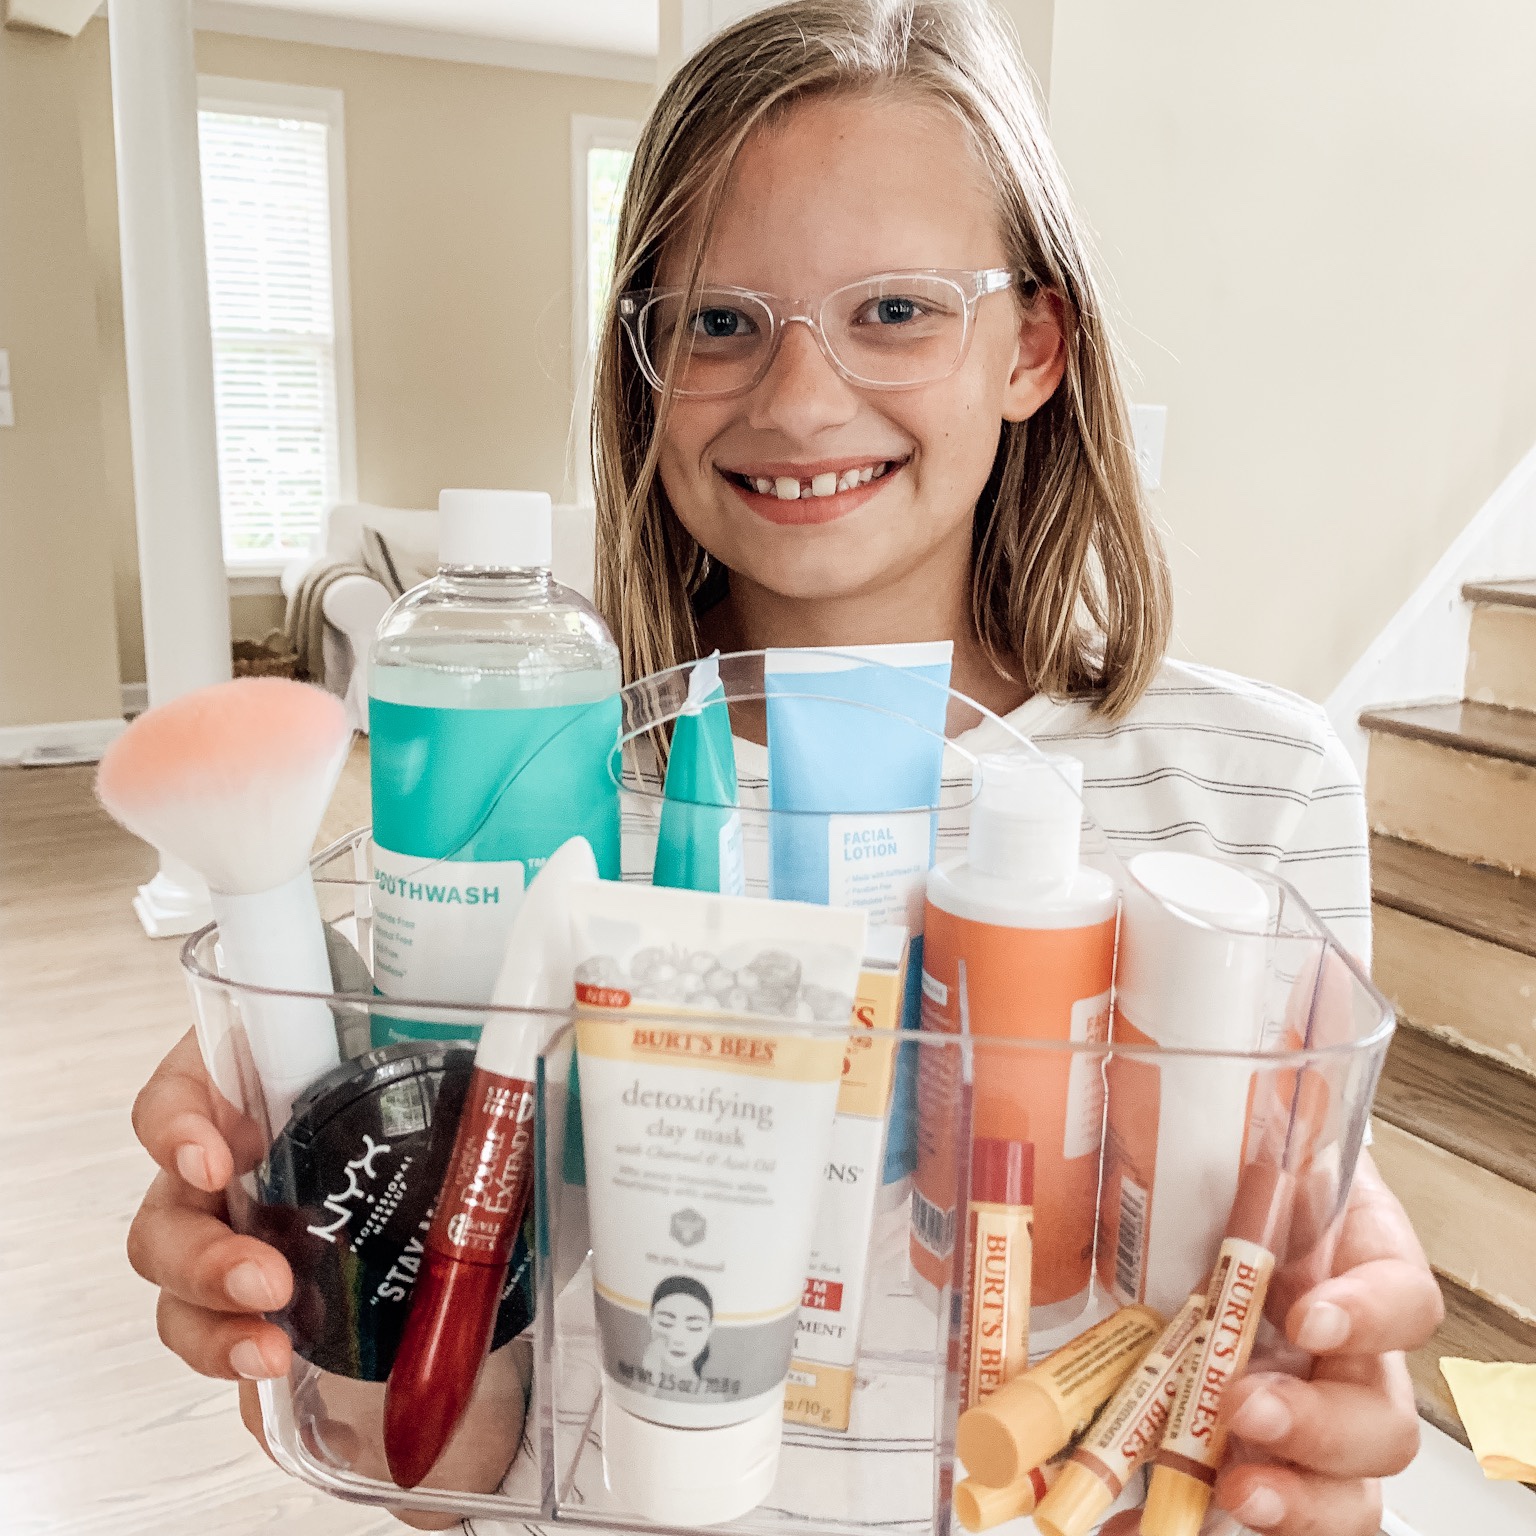 Introducing Your Tween To Makeup And Beauty Products Home And Kind